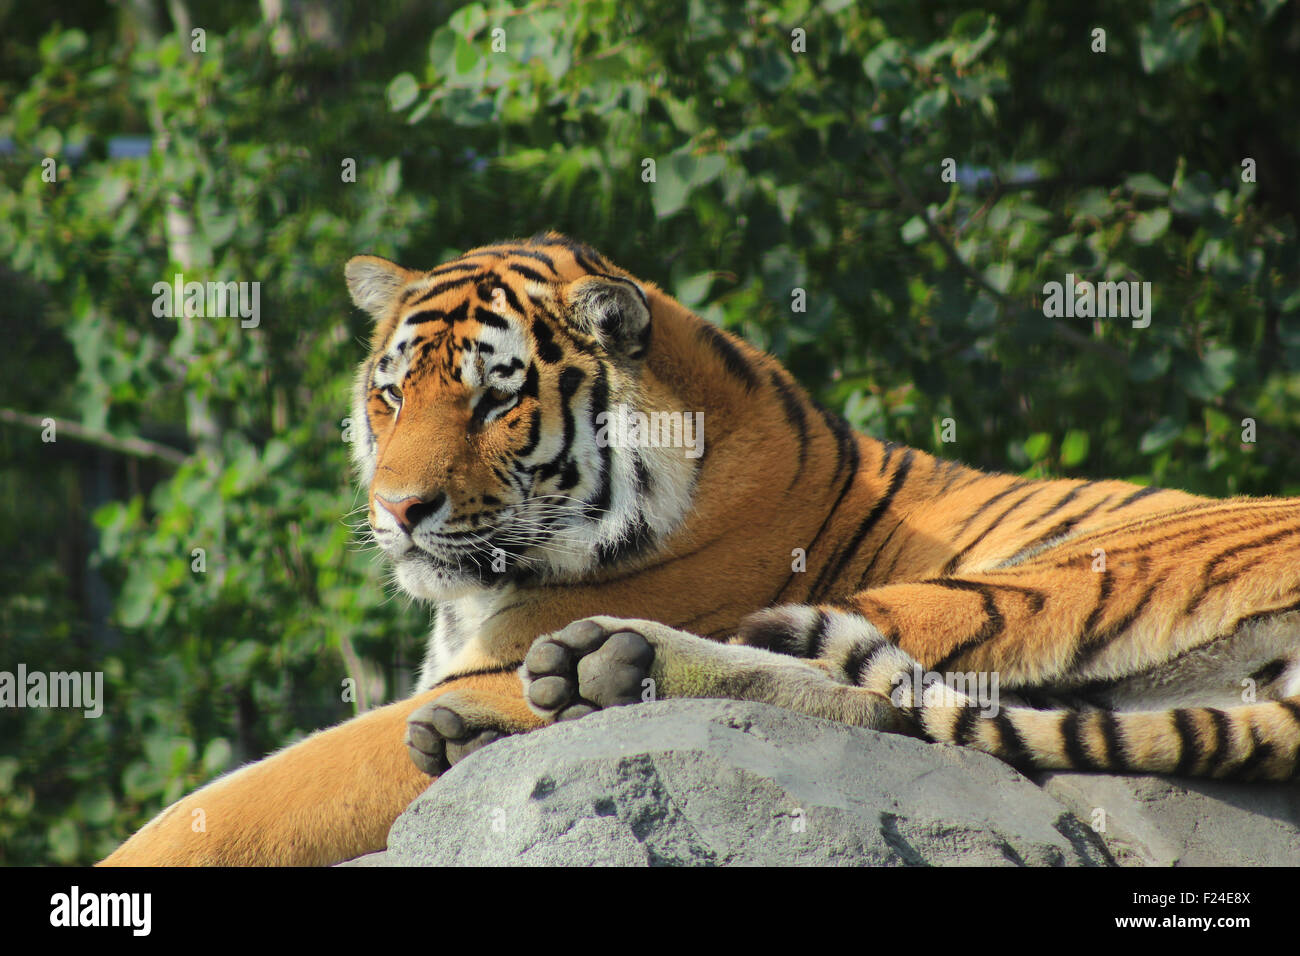 An Amur Tiger in an enclosure at a zoo in Winnipeg, Manitoba, Canada Stock Photo